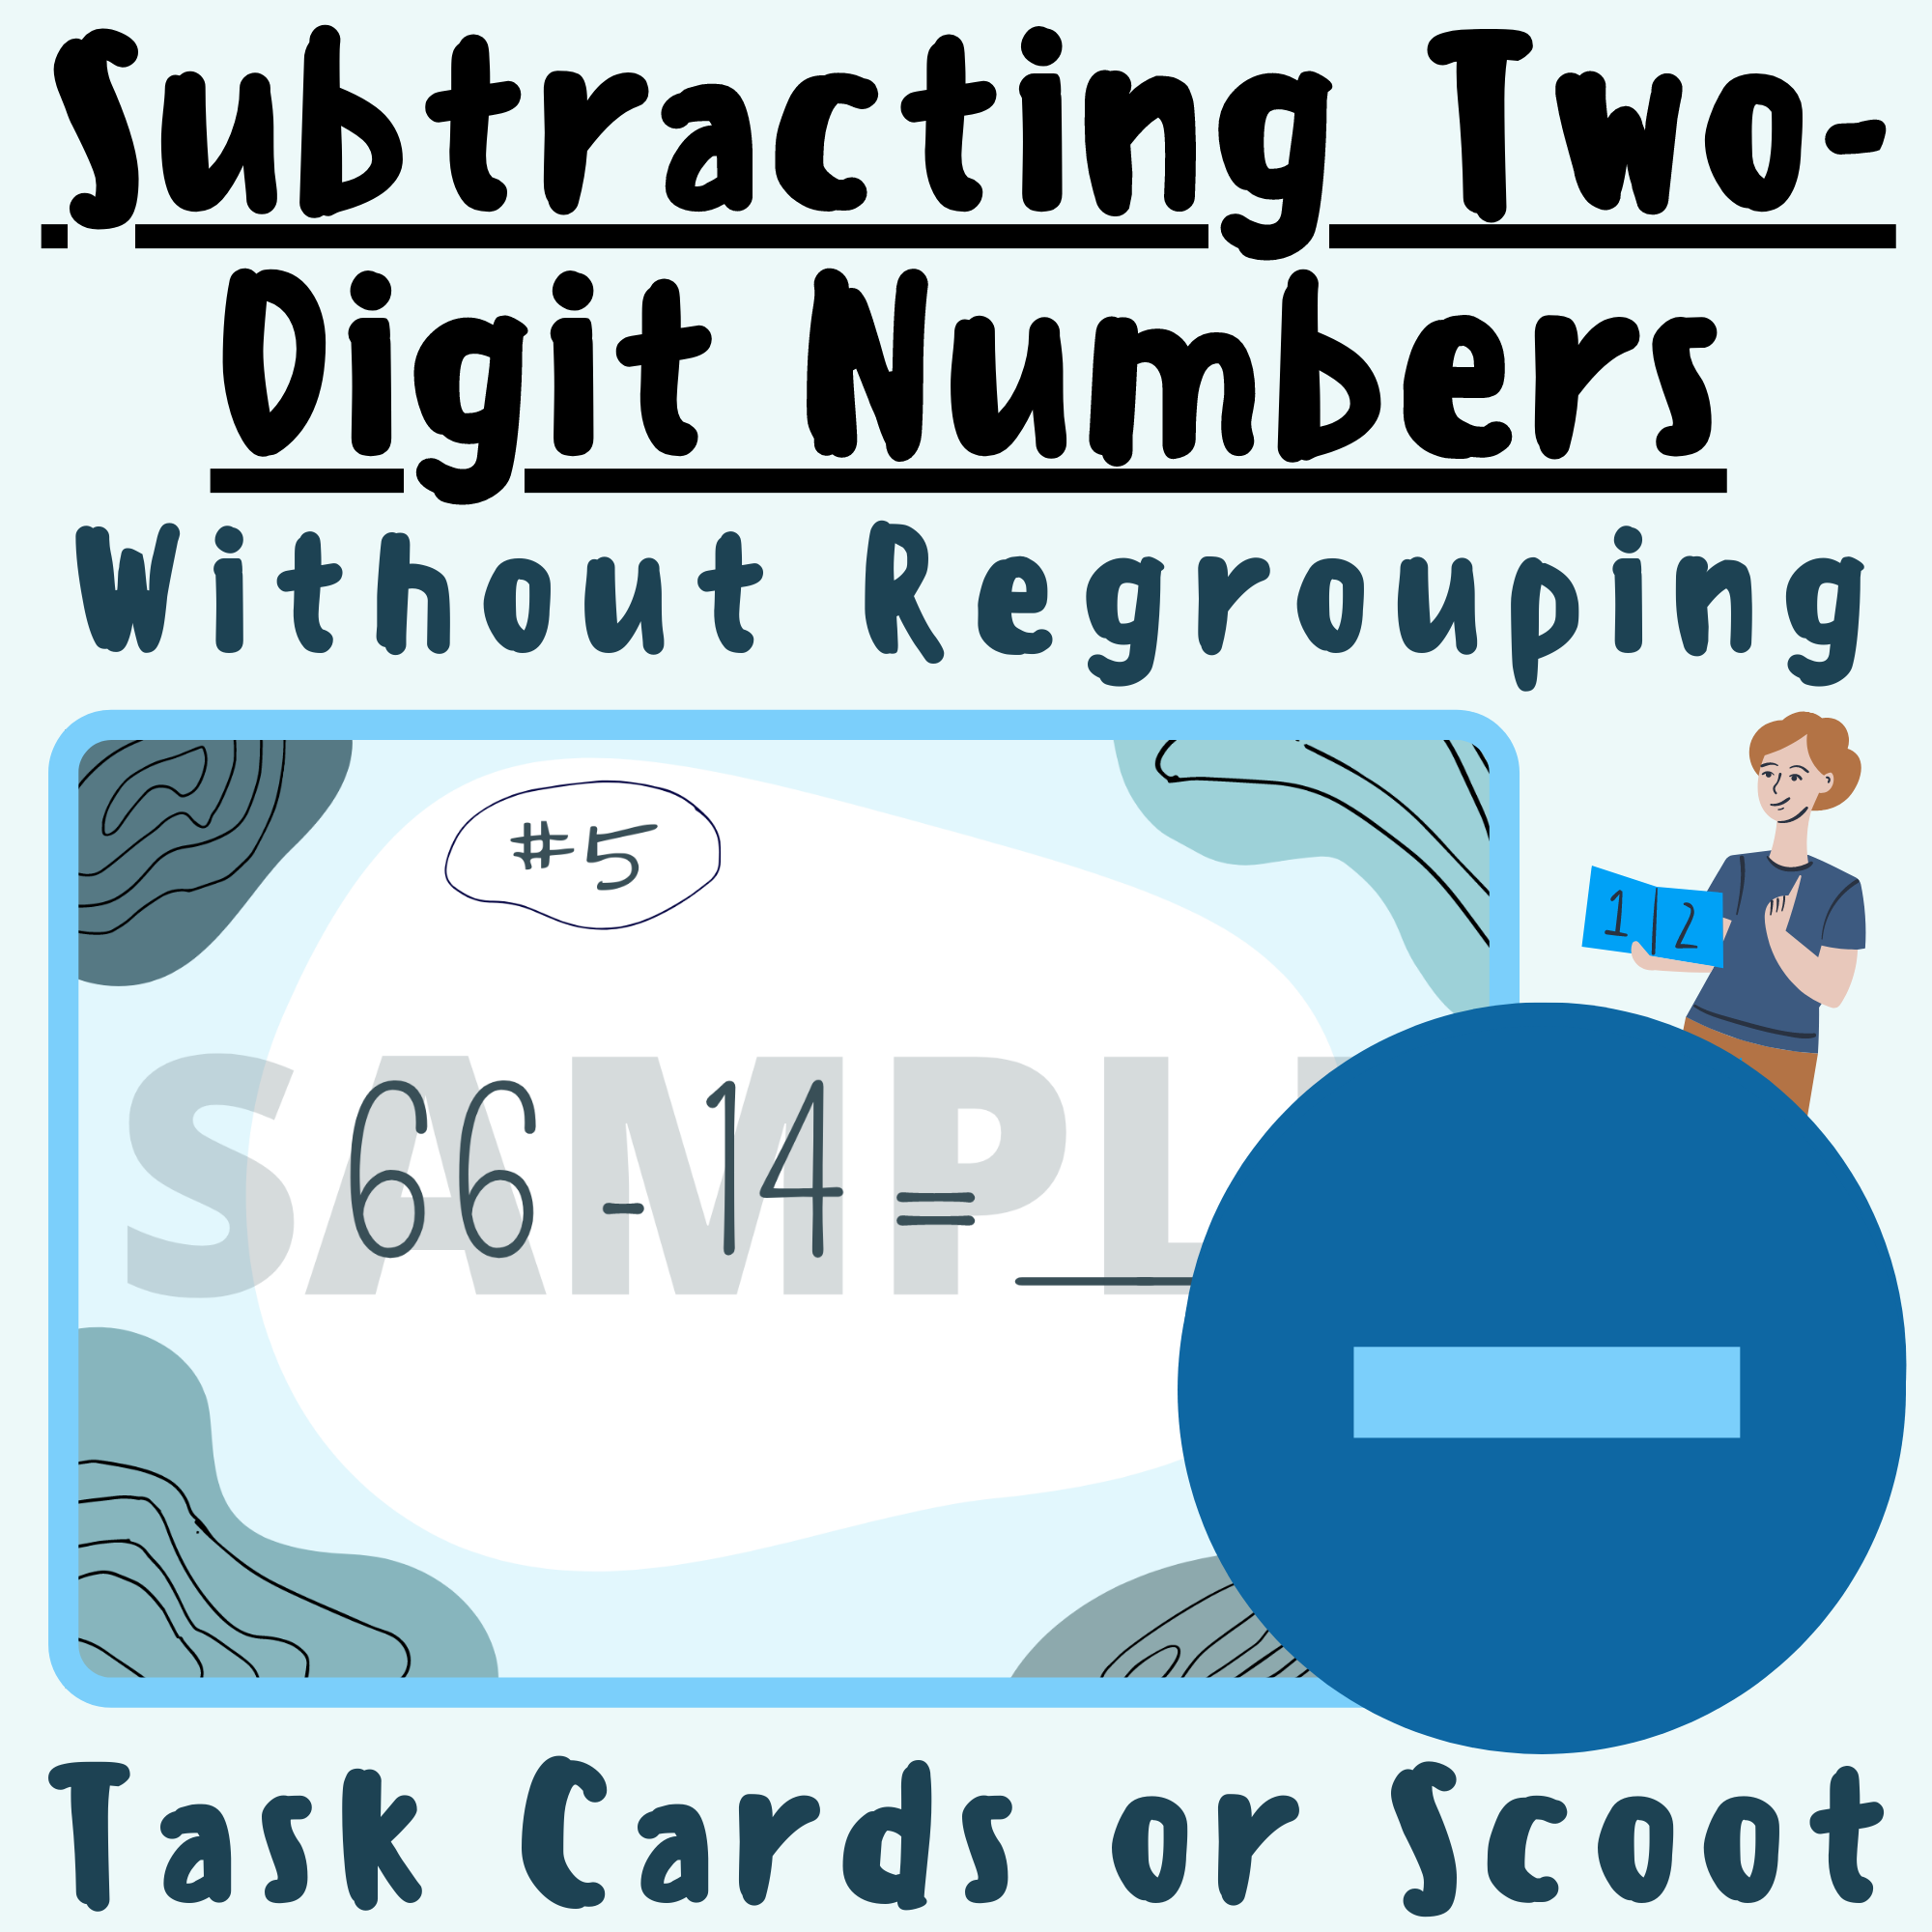 Subtracting Two-Digit Numbers Without Regrouping and Composing Task Cards or Scoot; For K-5 Teachers and Students in the Math Classroom